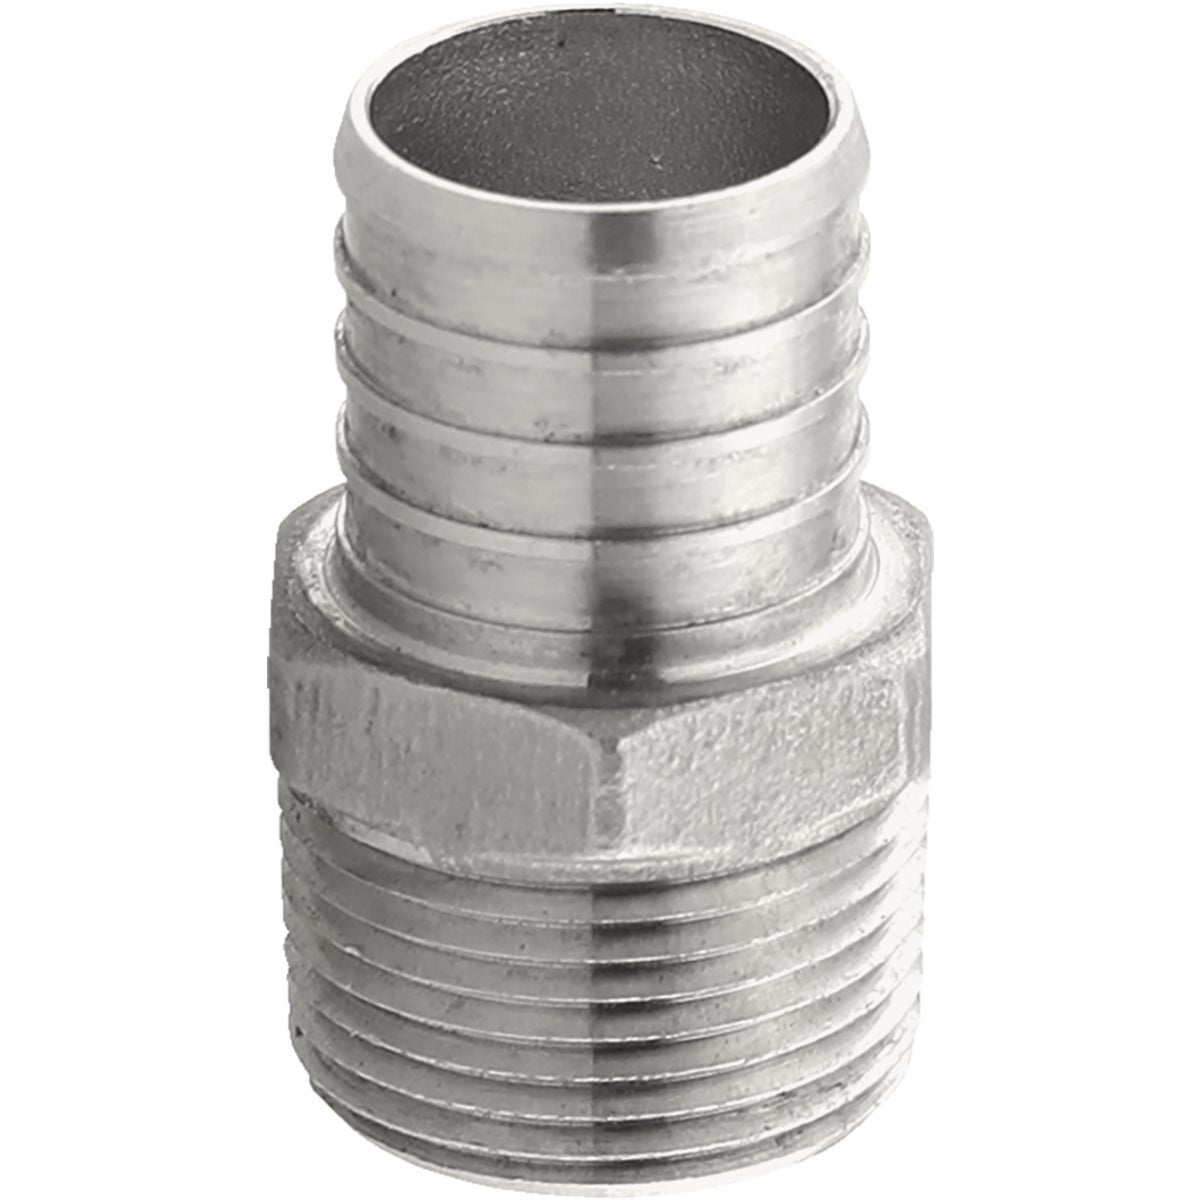 Plumbeez 1 In. x 3/4 In. MPT Stainless Steel PEX Adapter